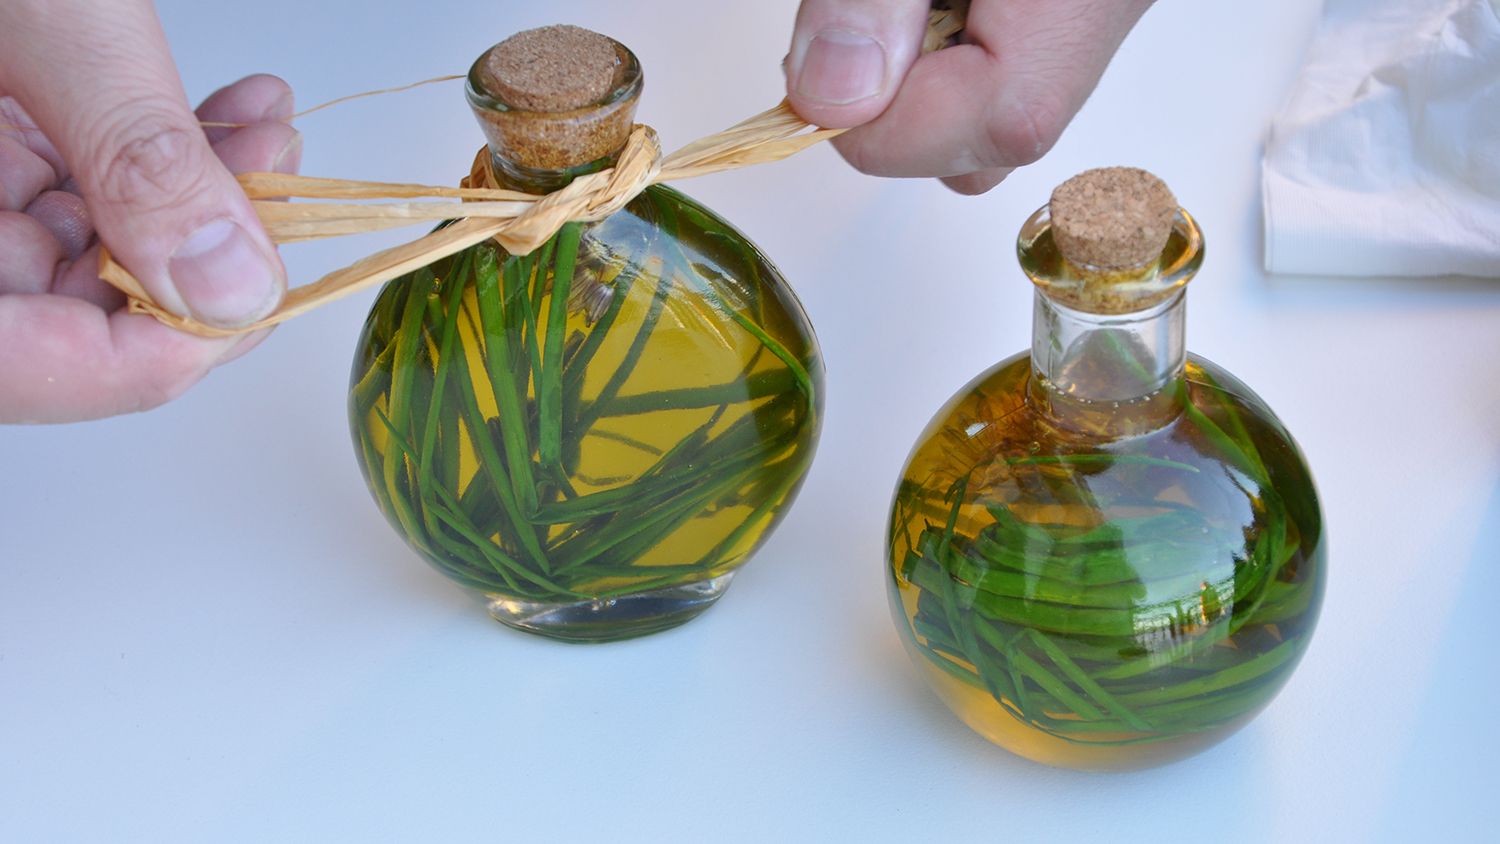 Two bottles of infused oils